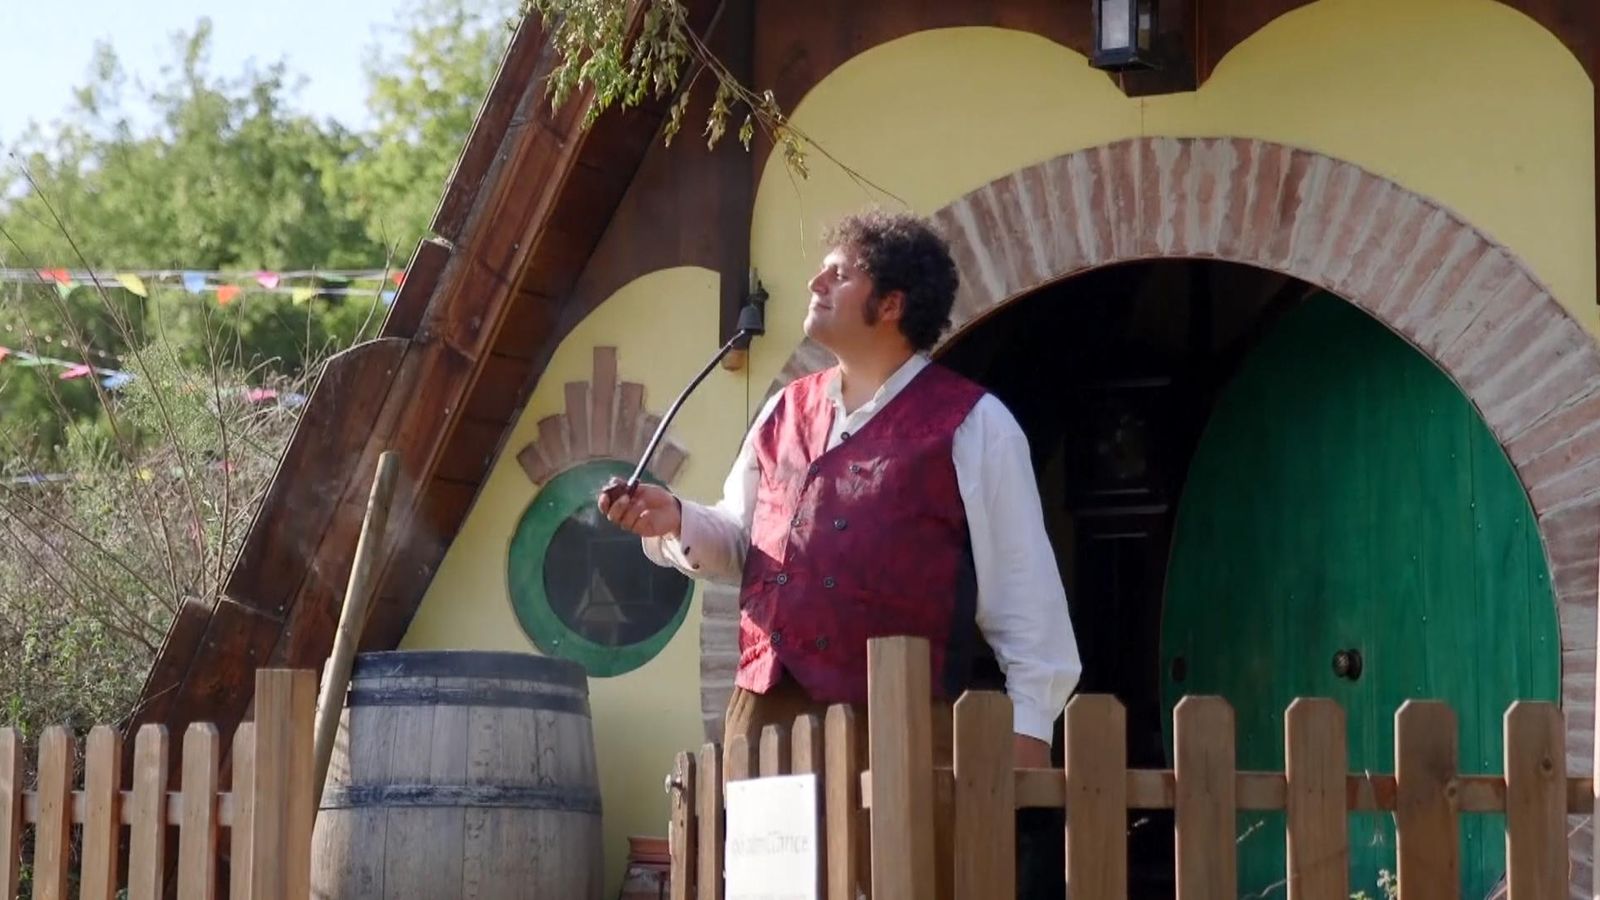 Hobbit superfan recreates the Shire in Italy after crowdfunding campaign, World News